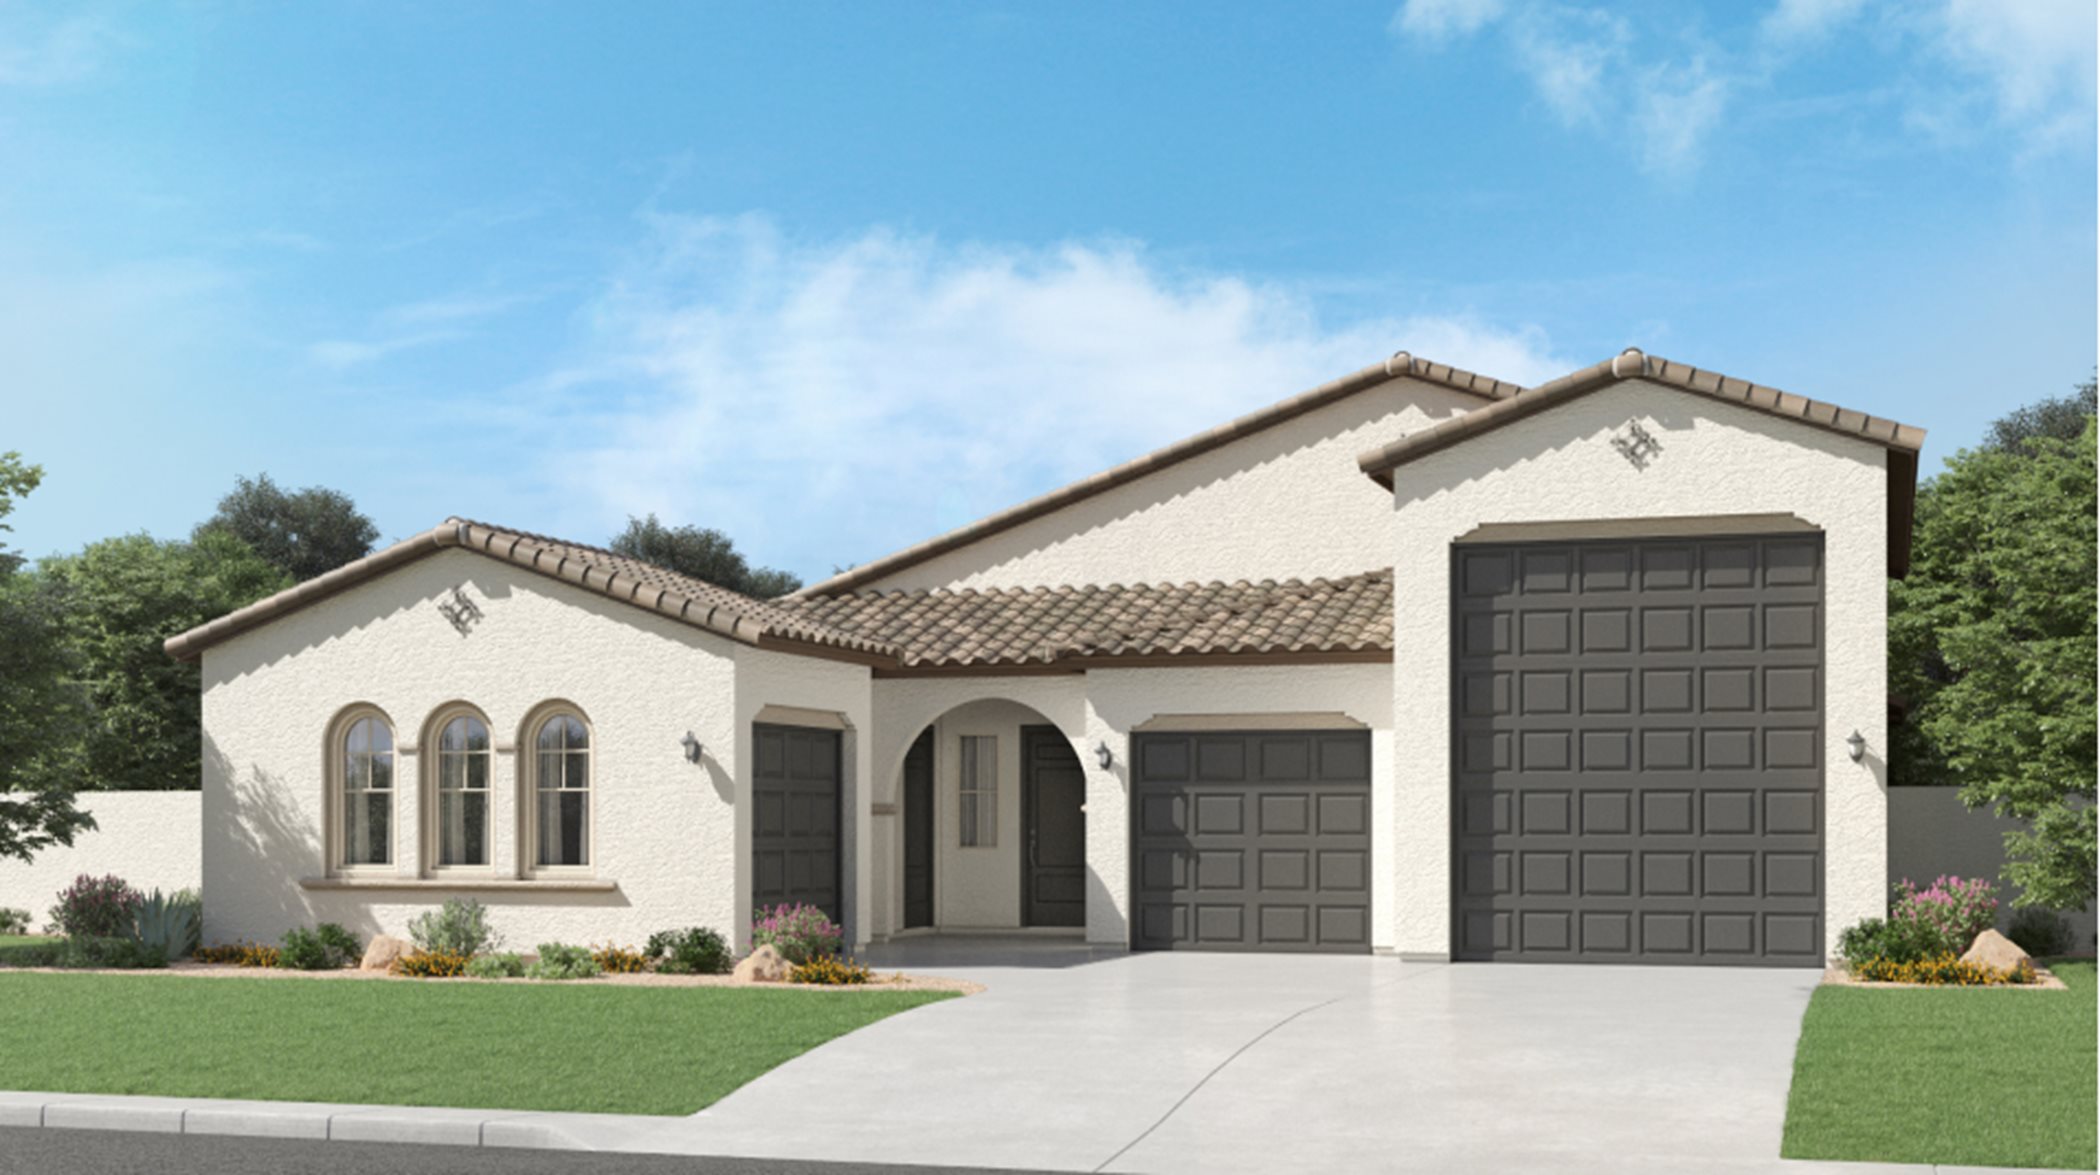 Spanish Colonial home rendering image